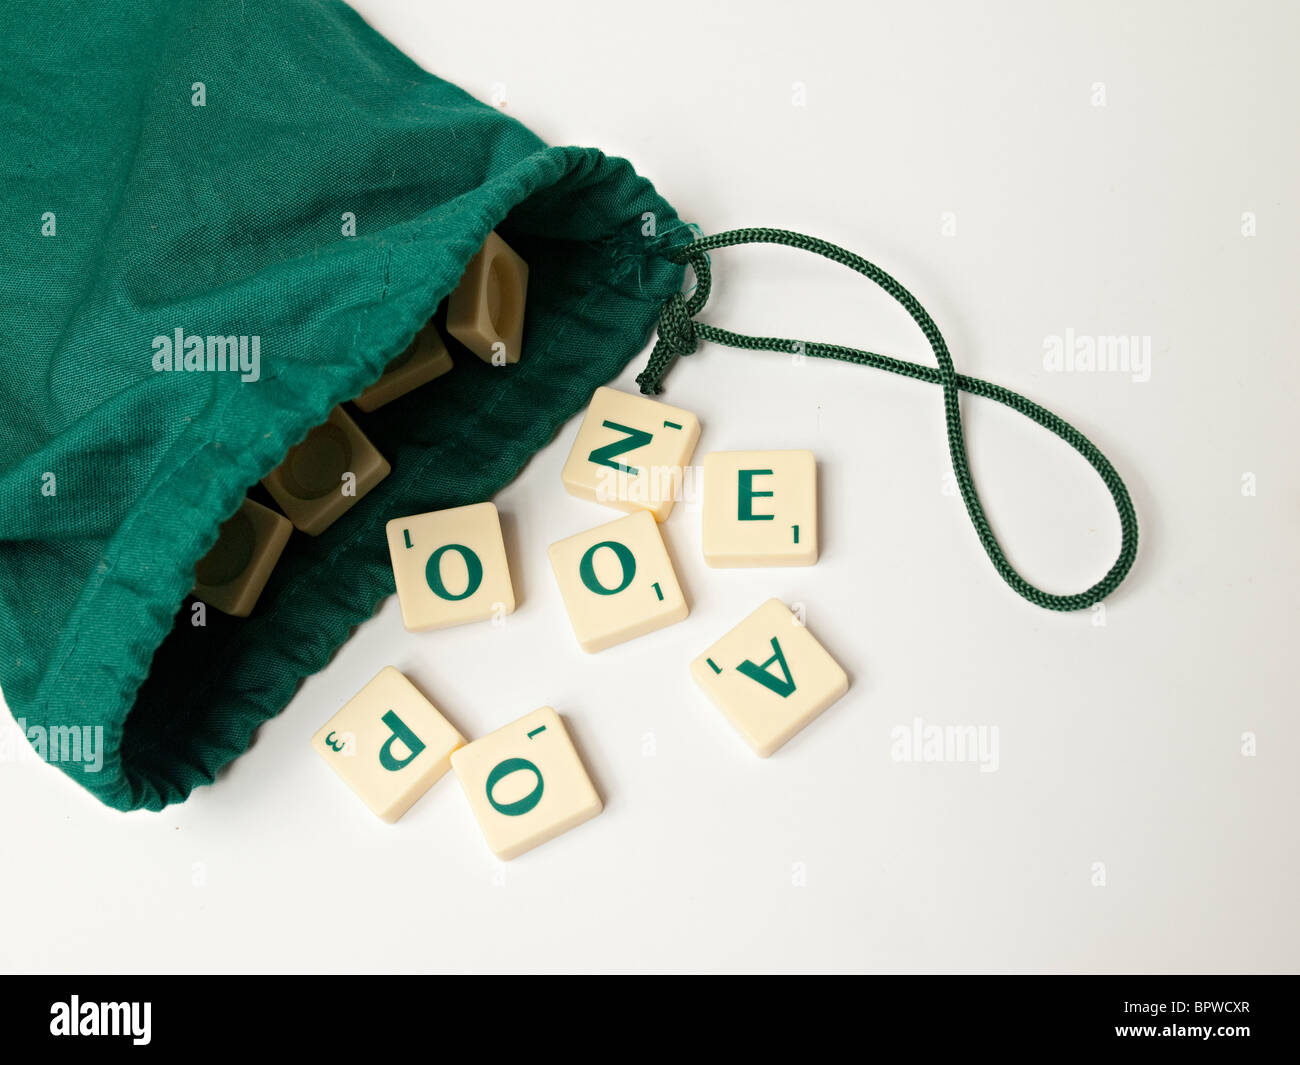 Scrabble tiles falling out of a green bag Stock Photo